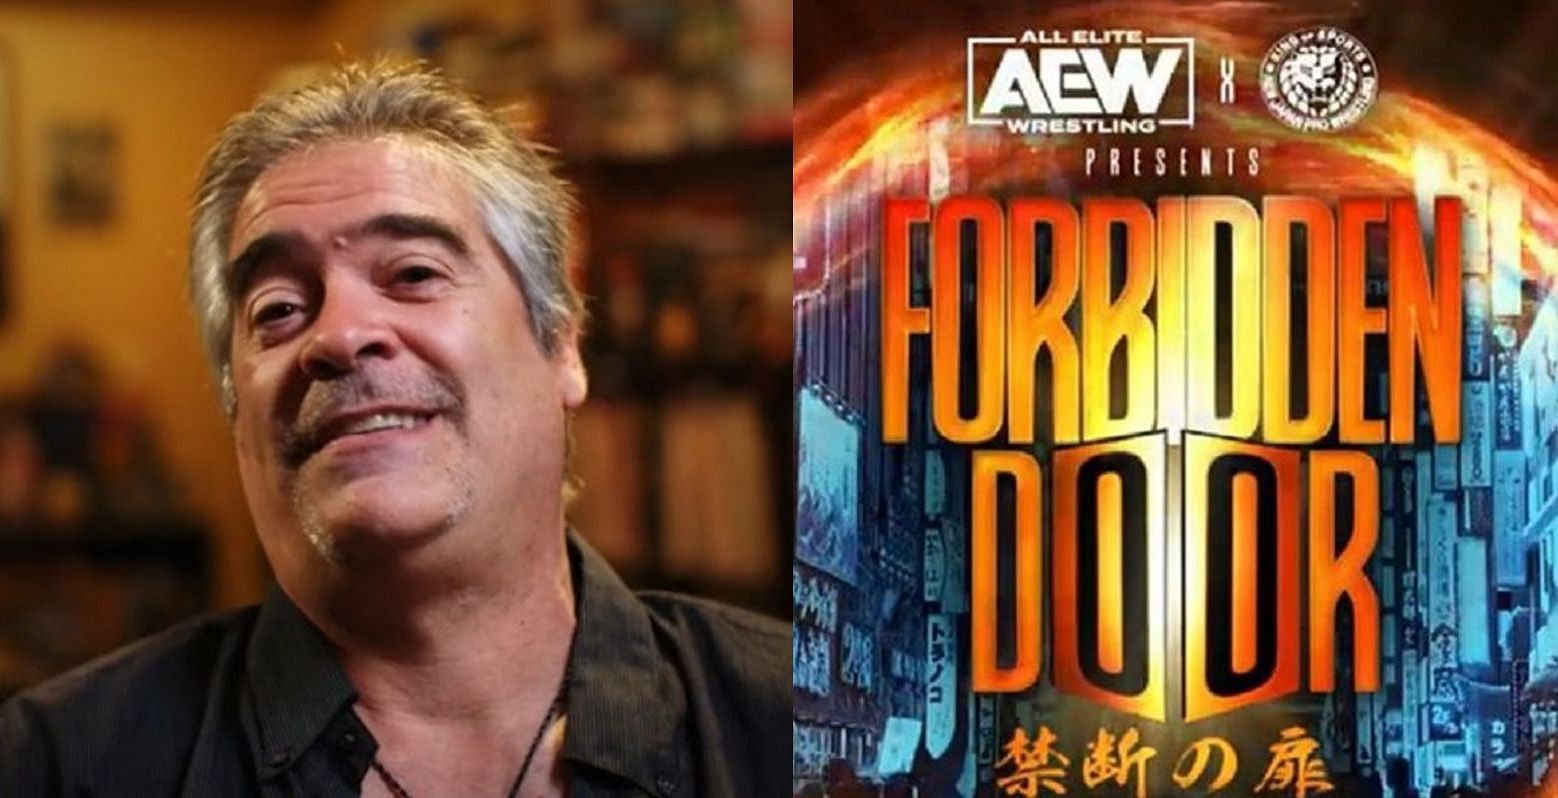 Vince Russo has been outspoken on AEW&#039;s relationship with NJPW